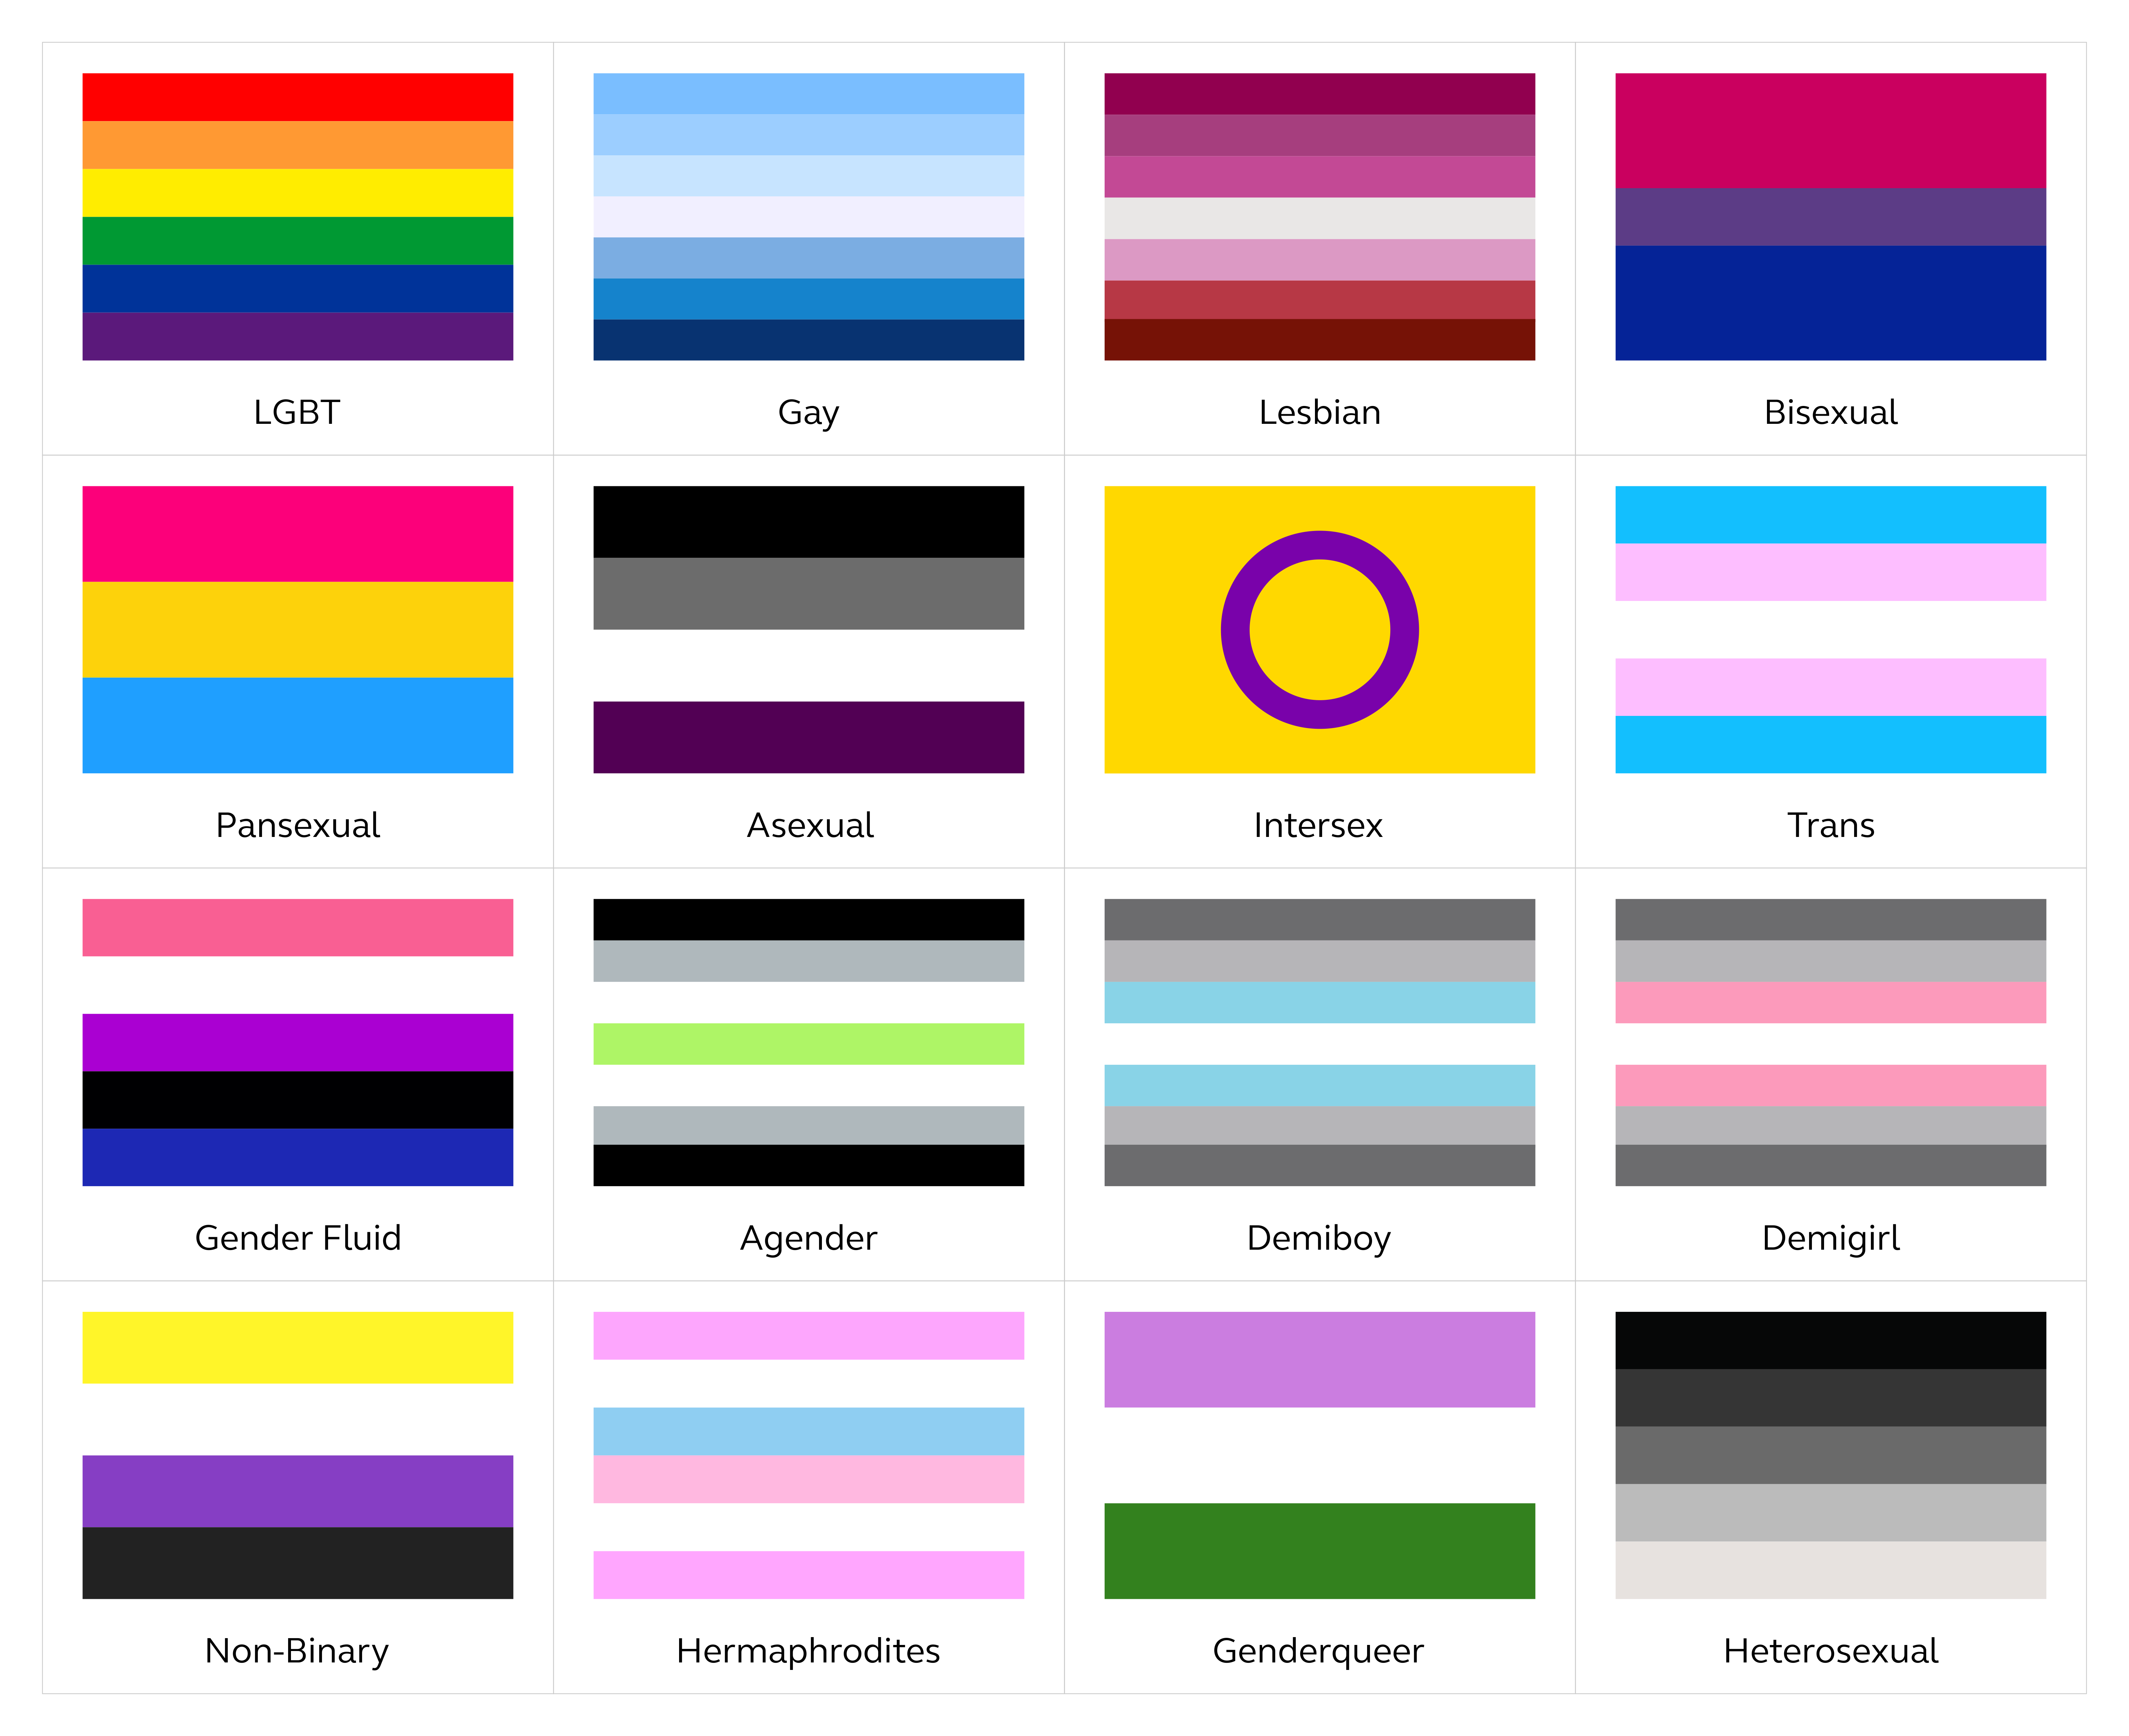 all gay pride flags